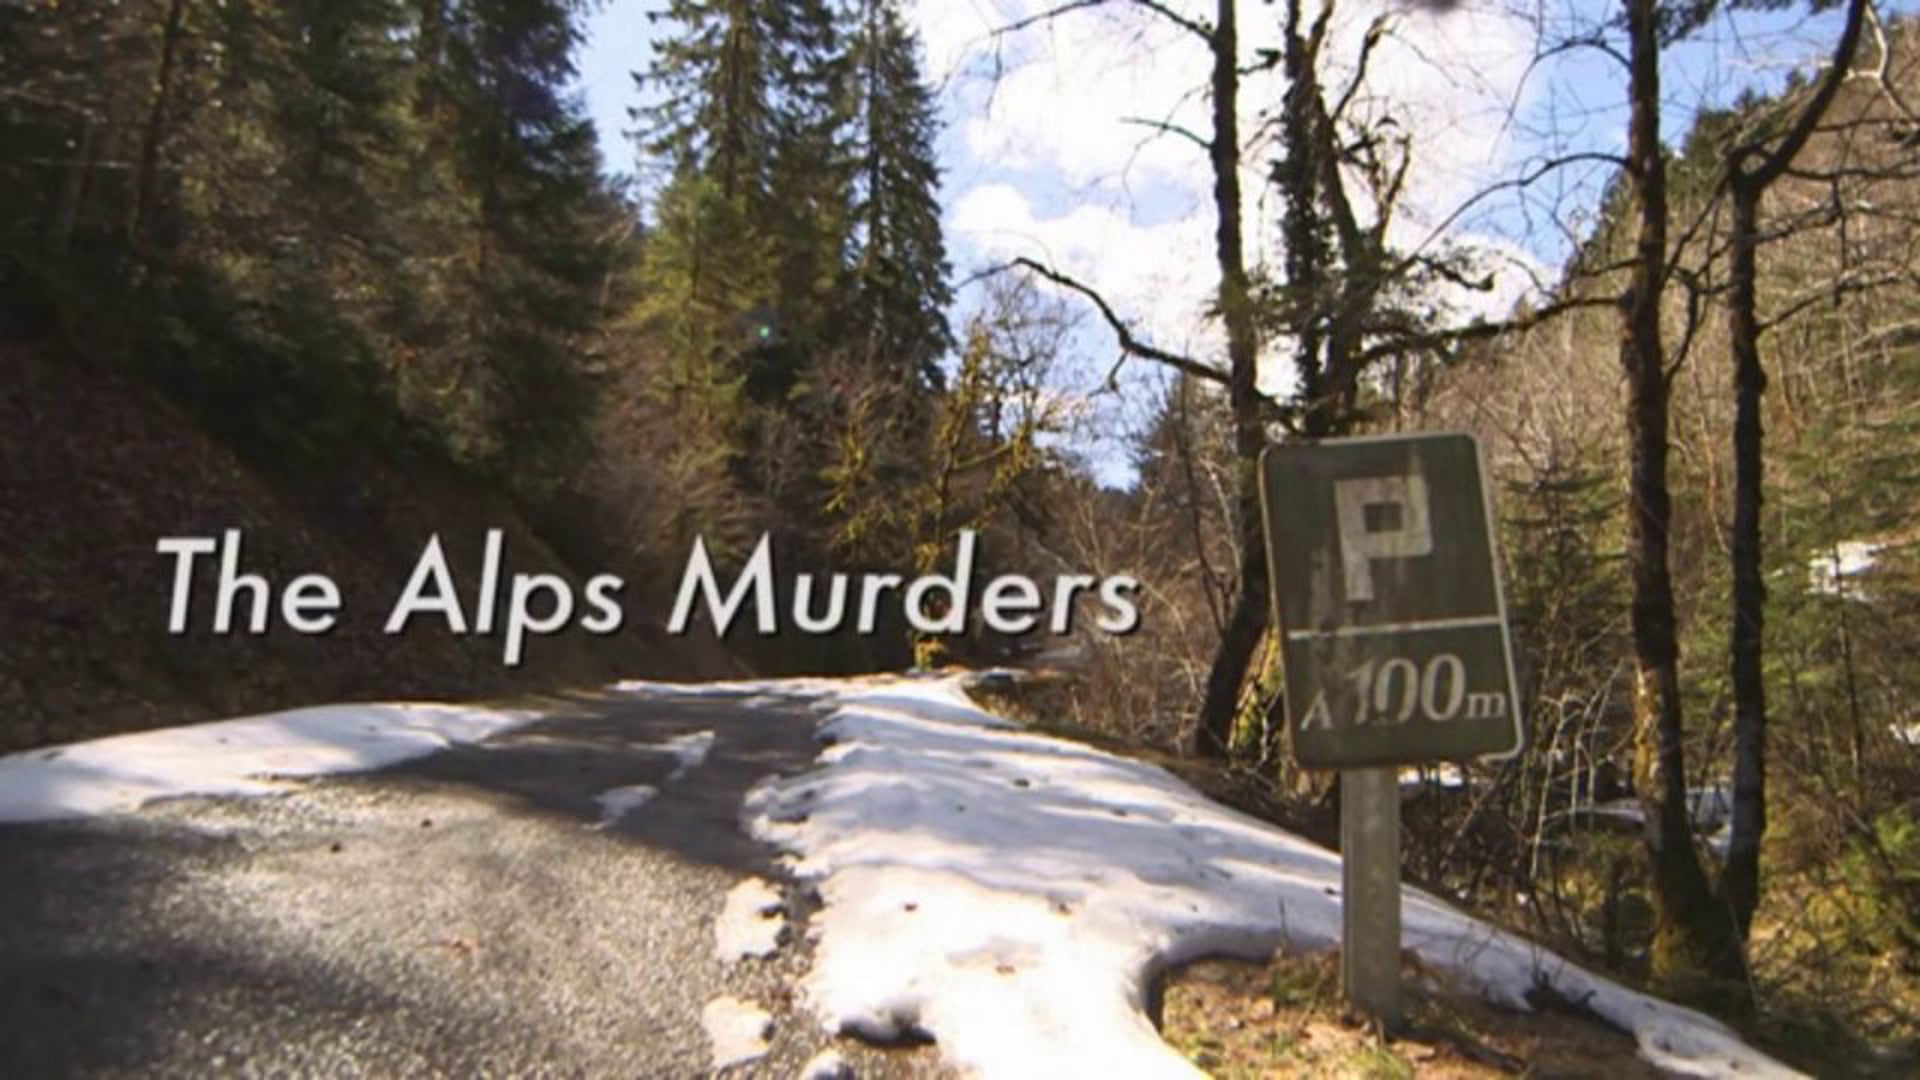 THE ALPS MURDERS 3 minute intro